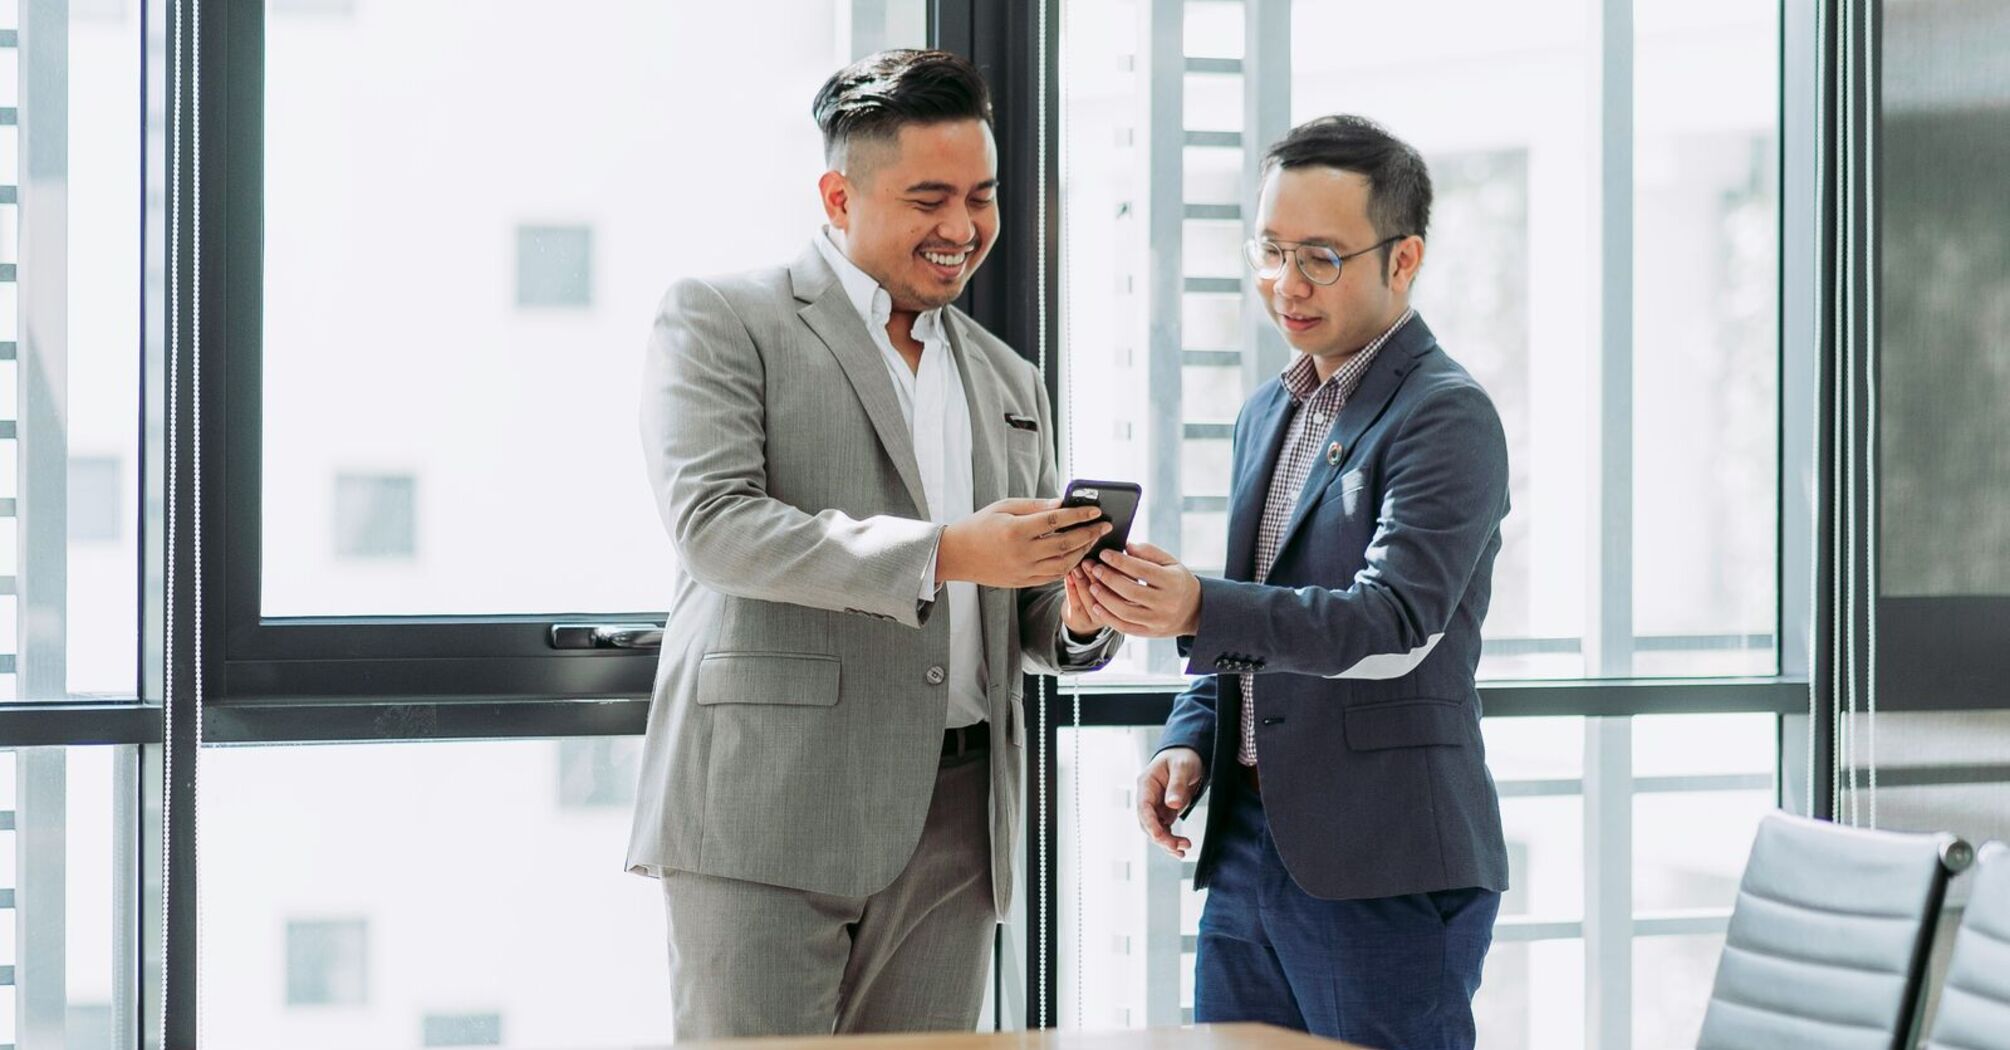 Two men looking at a smartphone in the office